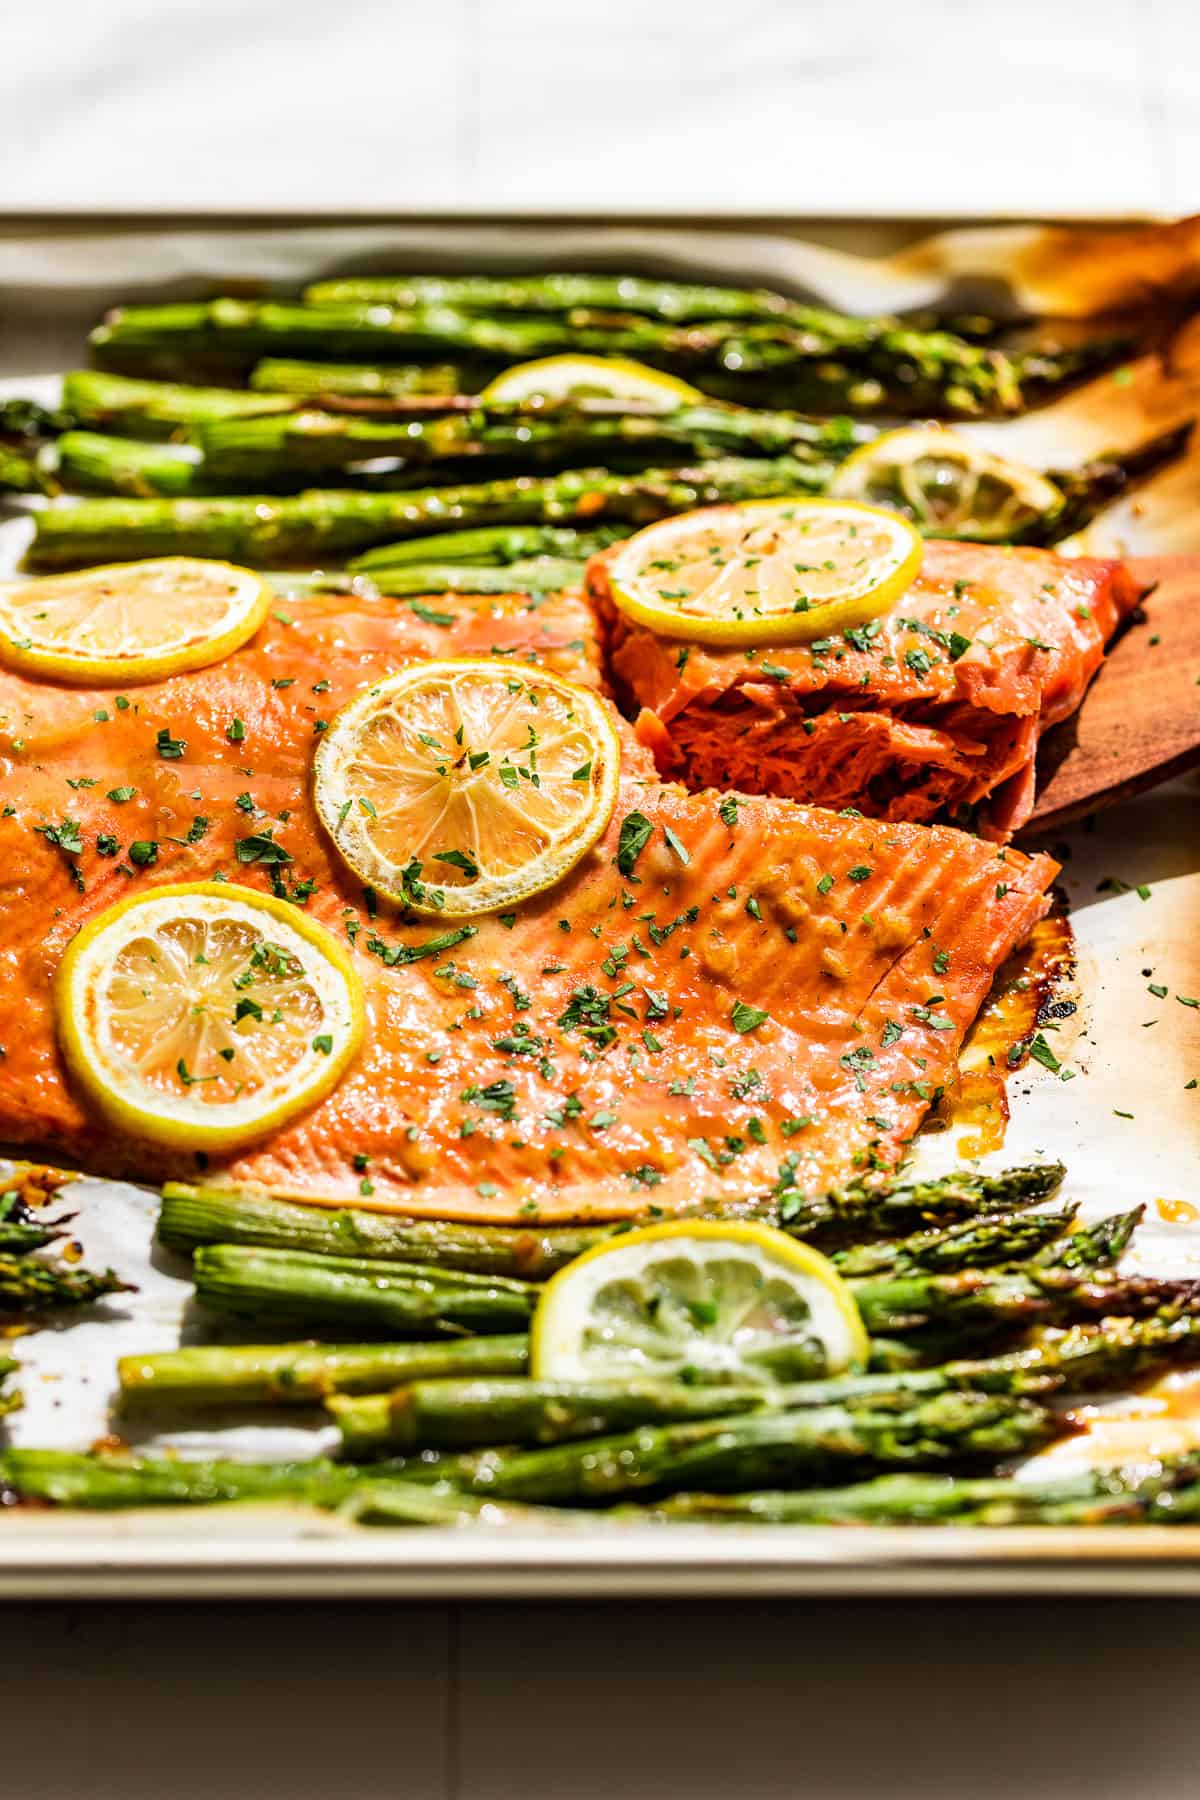 A side view of the Honey Dijon Salmon and Asparagus on a sheet pan with lemon slices.